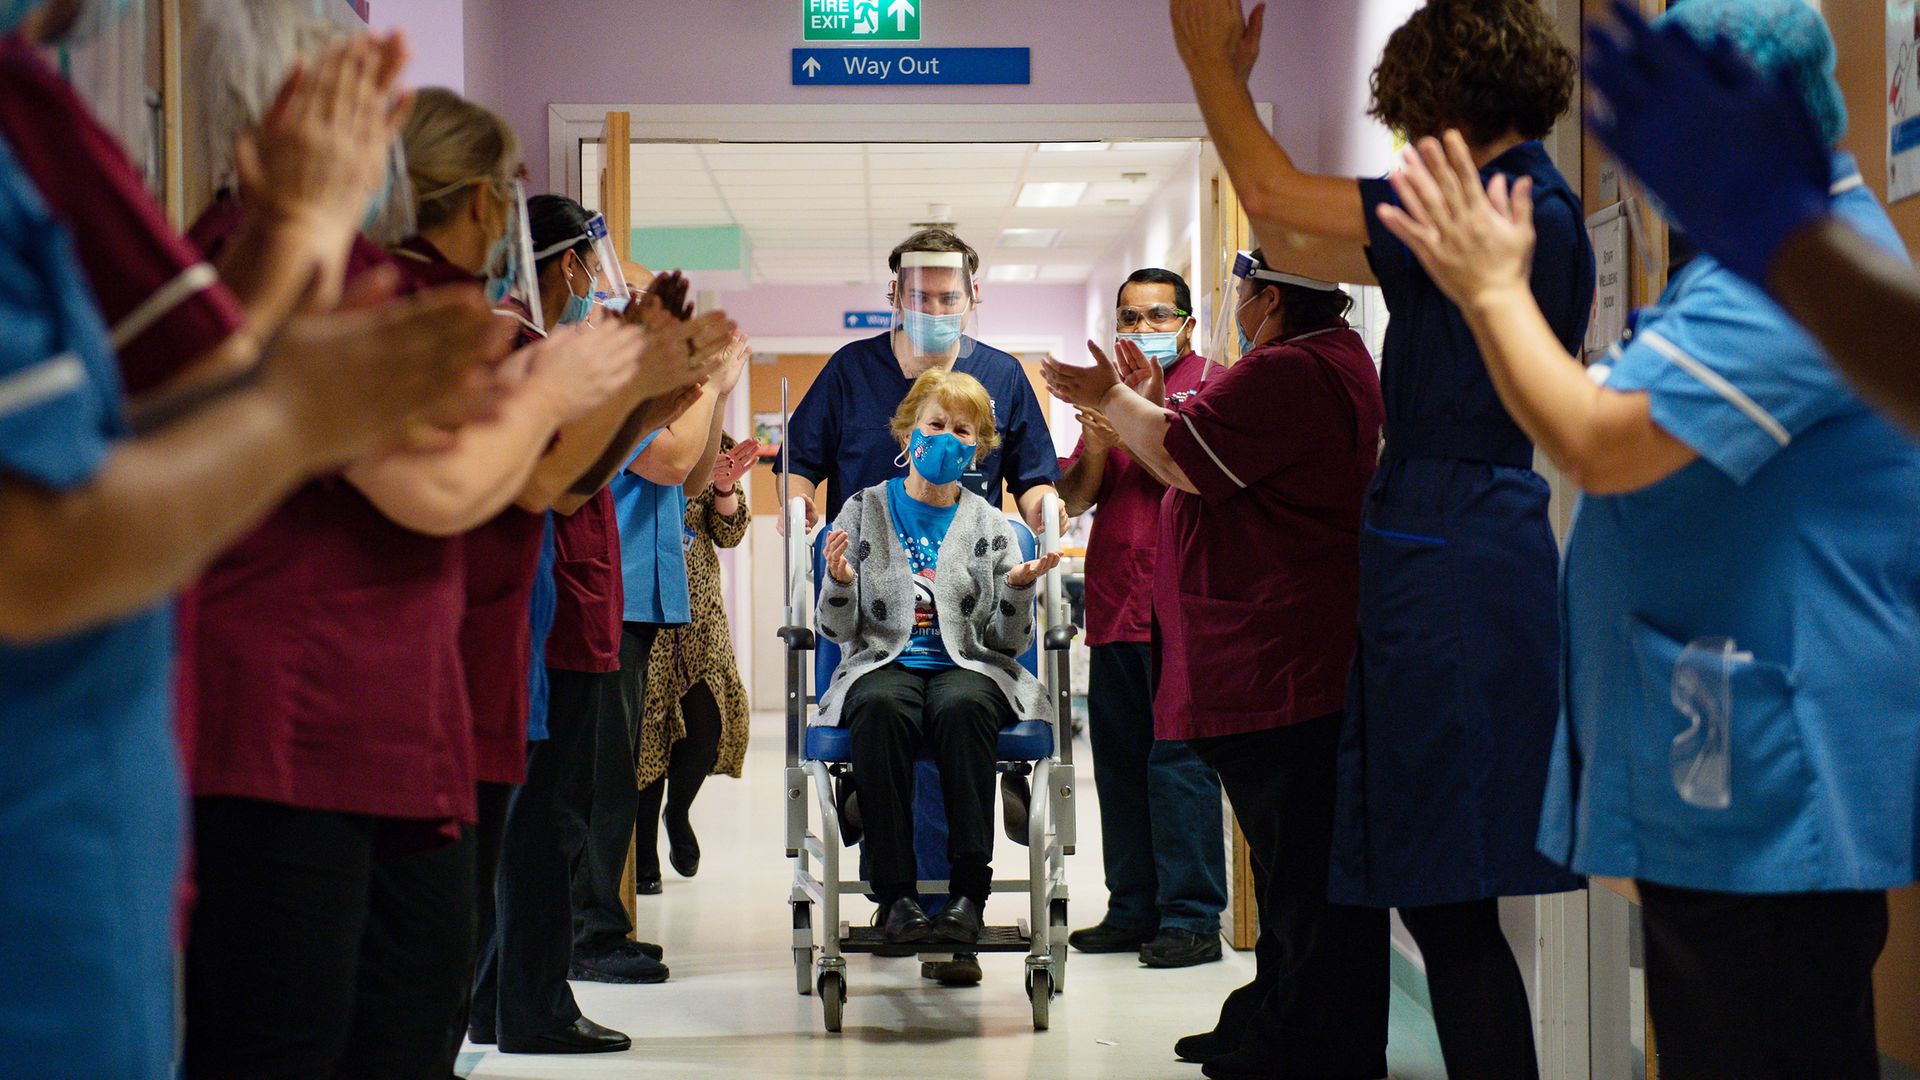 Margaret Keenan, 90, is applauded by staff as she returns to her ward after becoming the first person in the United Kingdom to receive the Pfizer/BioNtech covid-19 vaccine at University Hospital, Coventry, at the start of the largest ever immunisation programme in the UK's history. - Credit: PA